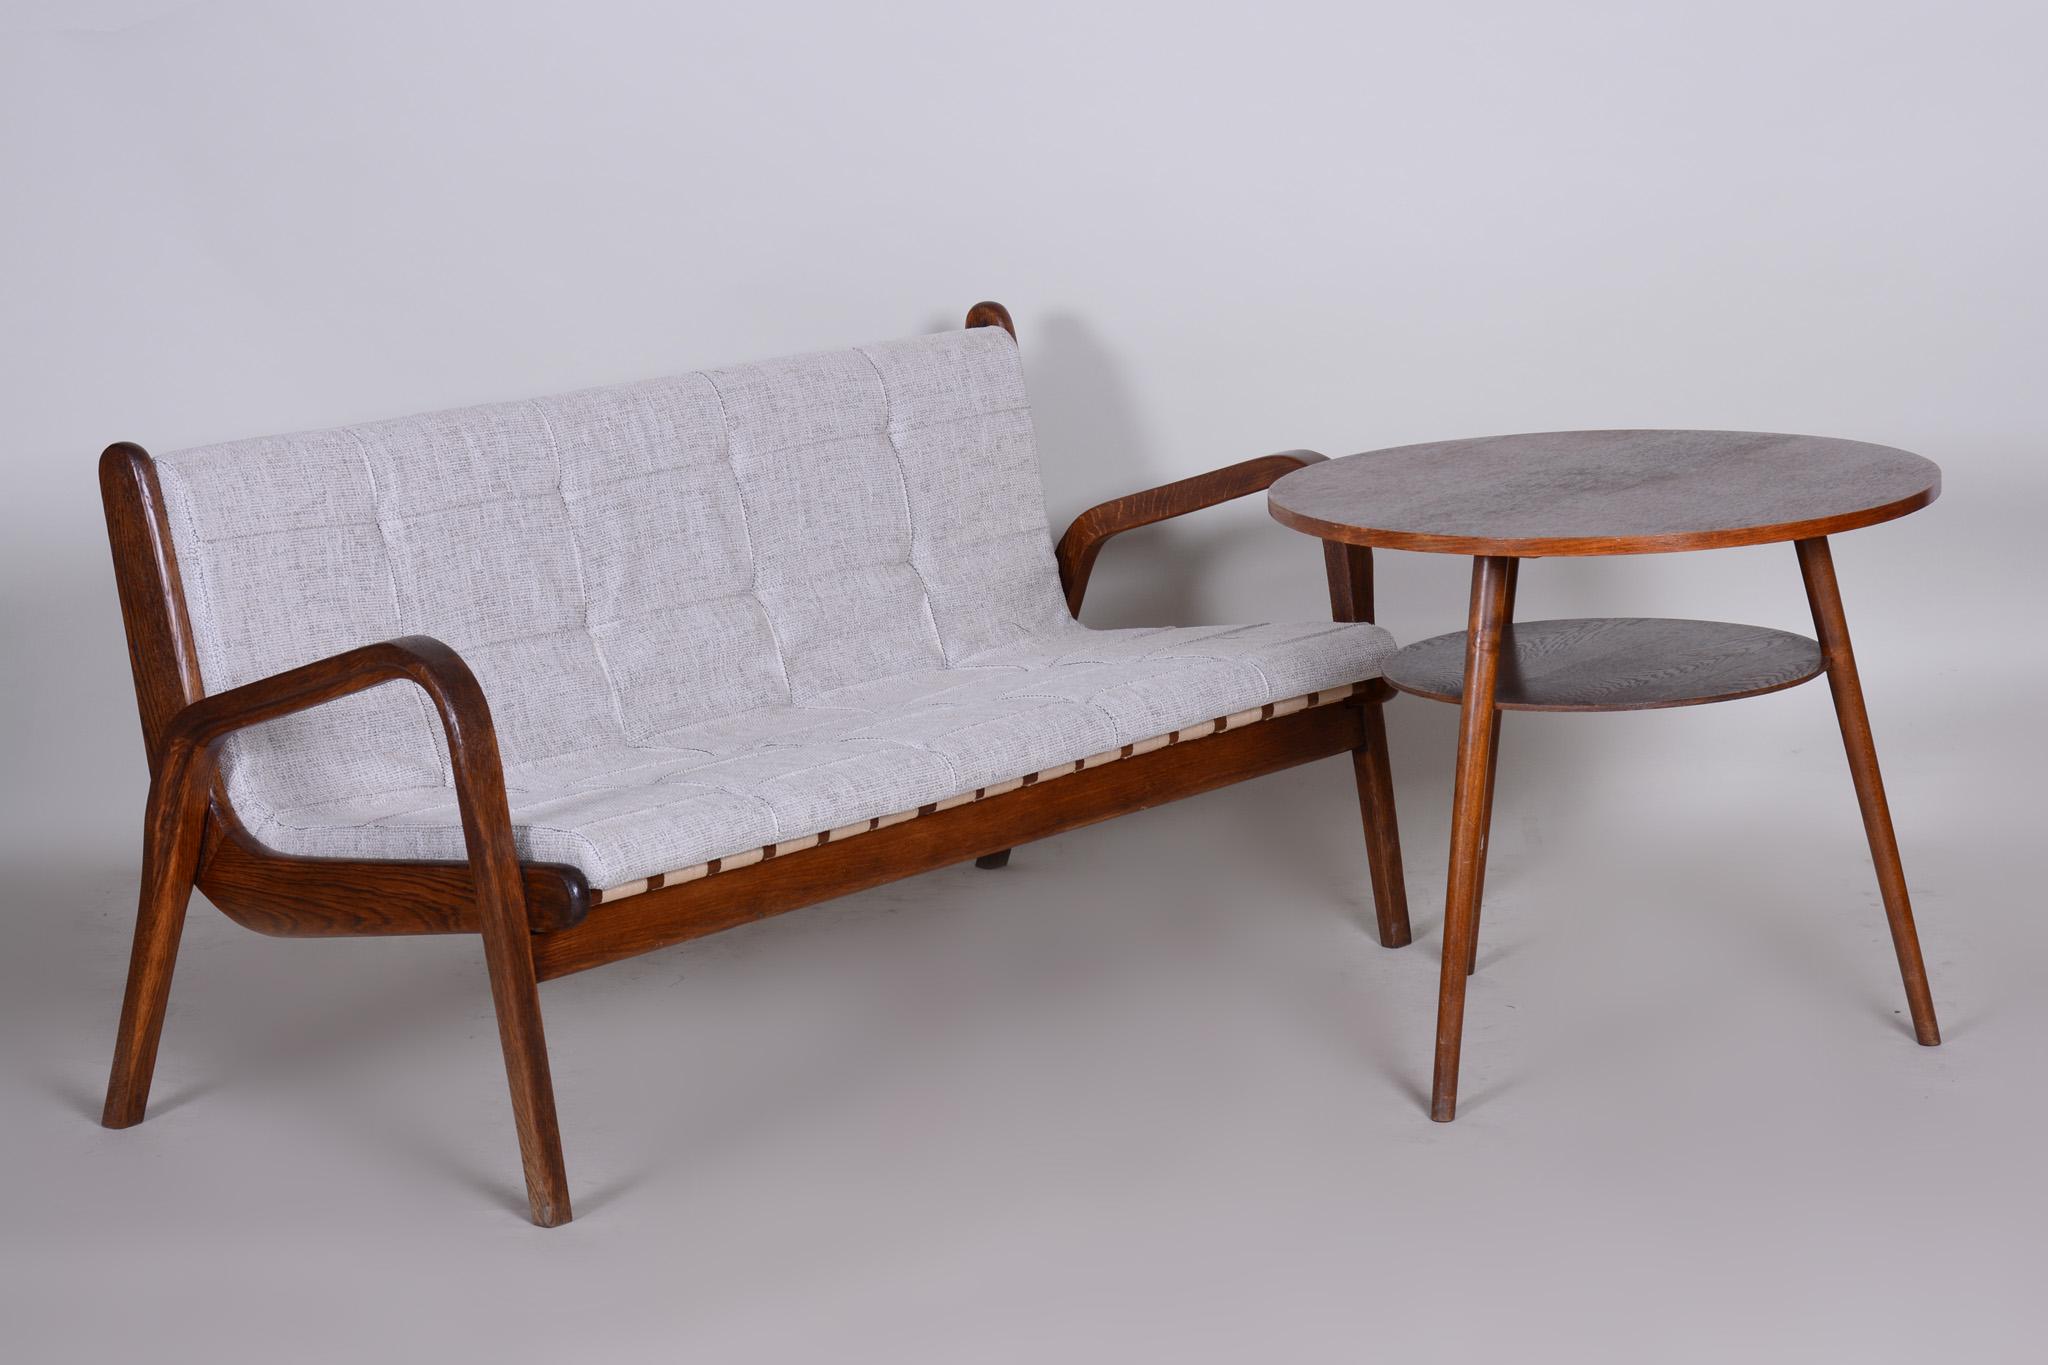 20th Century Czech Midcentury Brown Beech Sofa by Jan Vanek, New Upholstery, 1950s For Sale